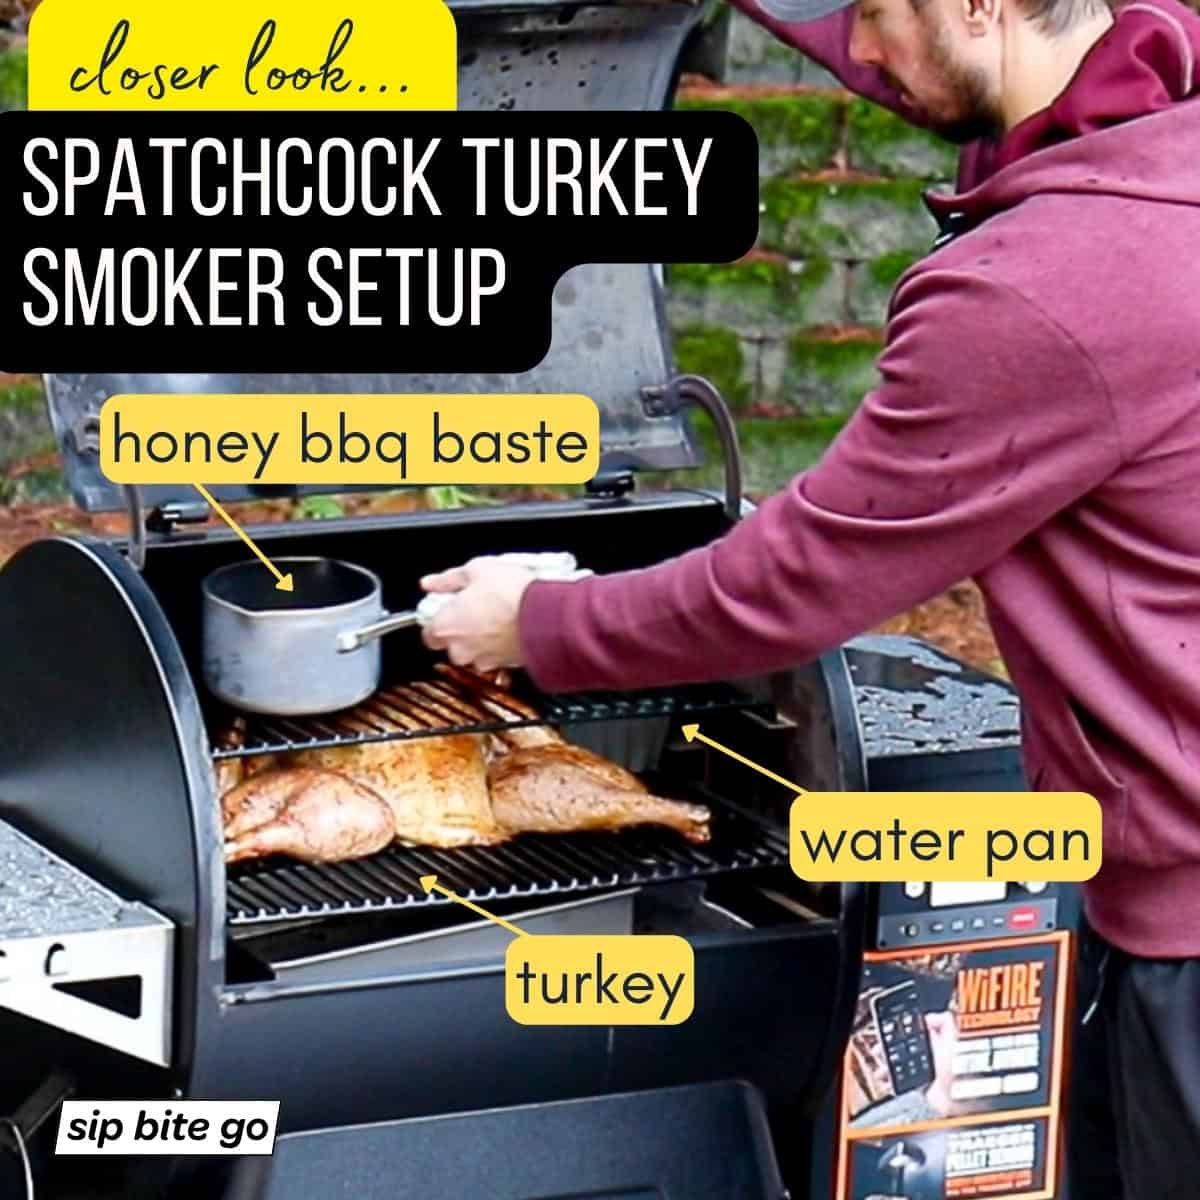 Infographic demonstrating spatchcock turkey smoker setup with water pan and bbq honey butter baste